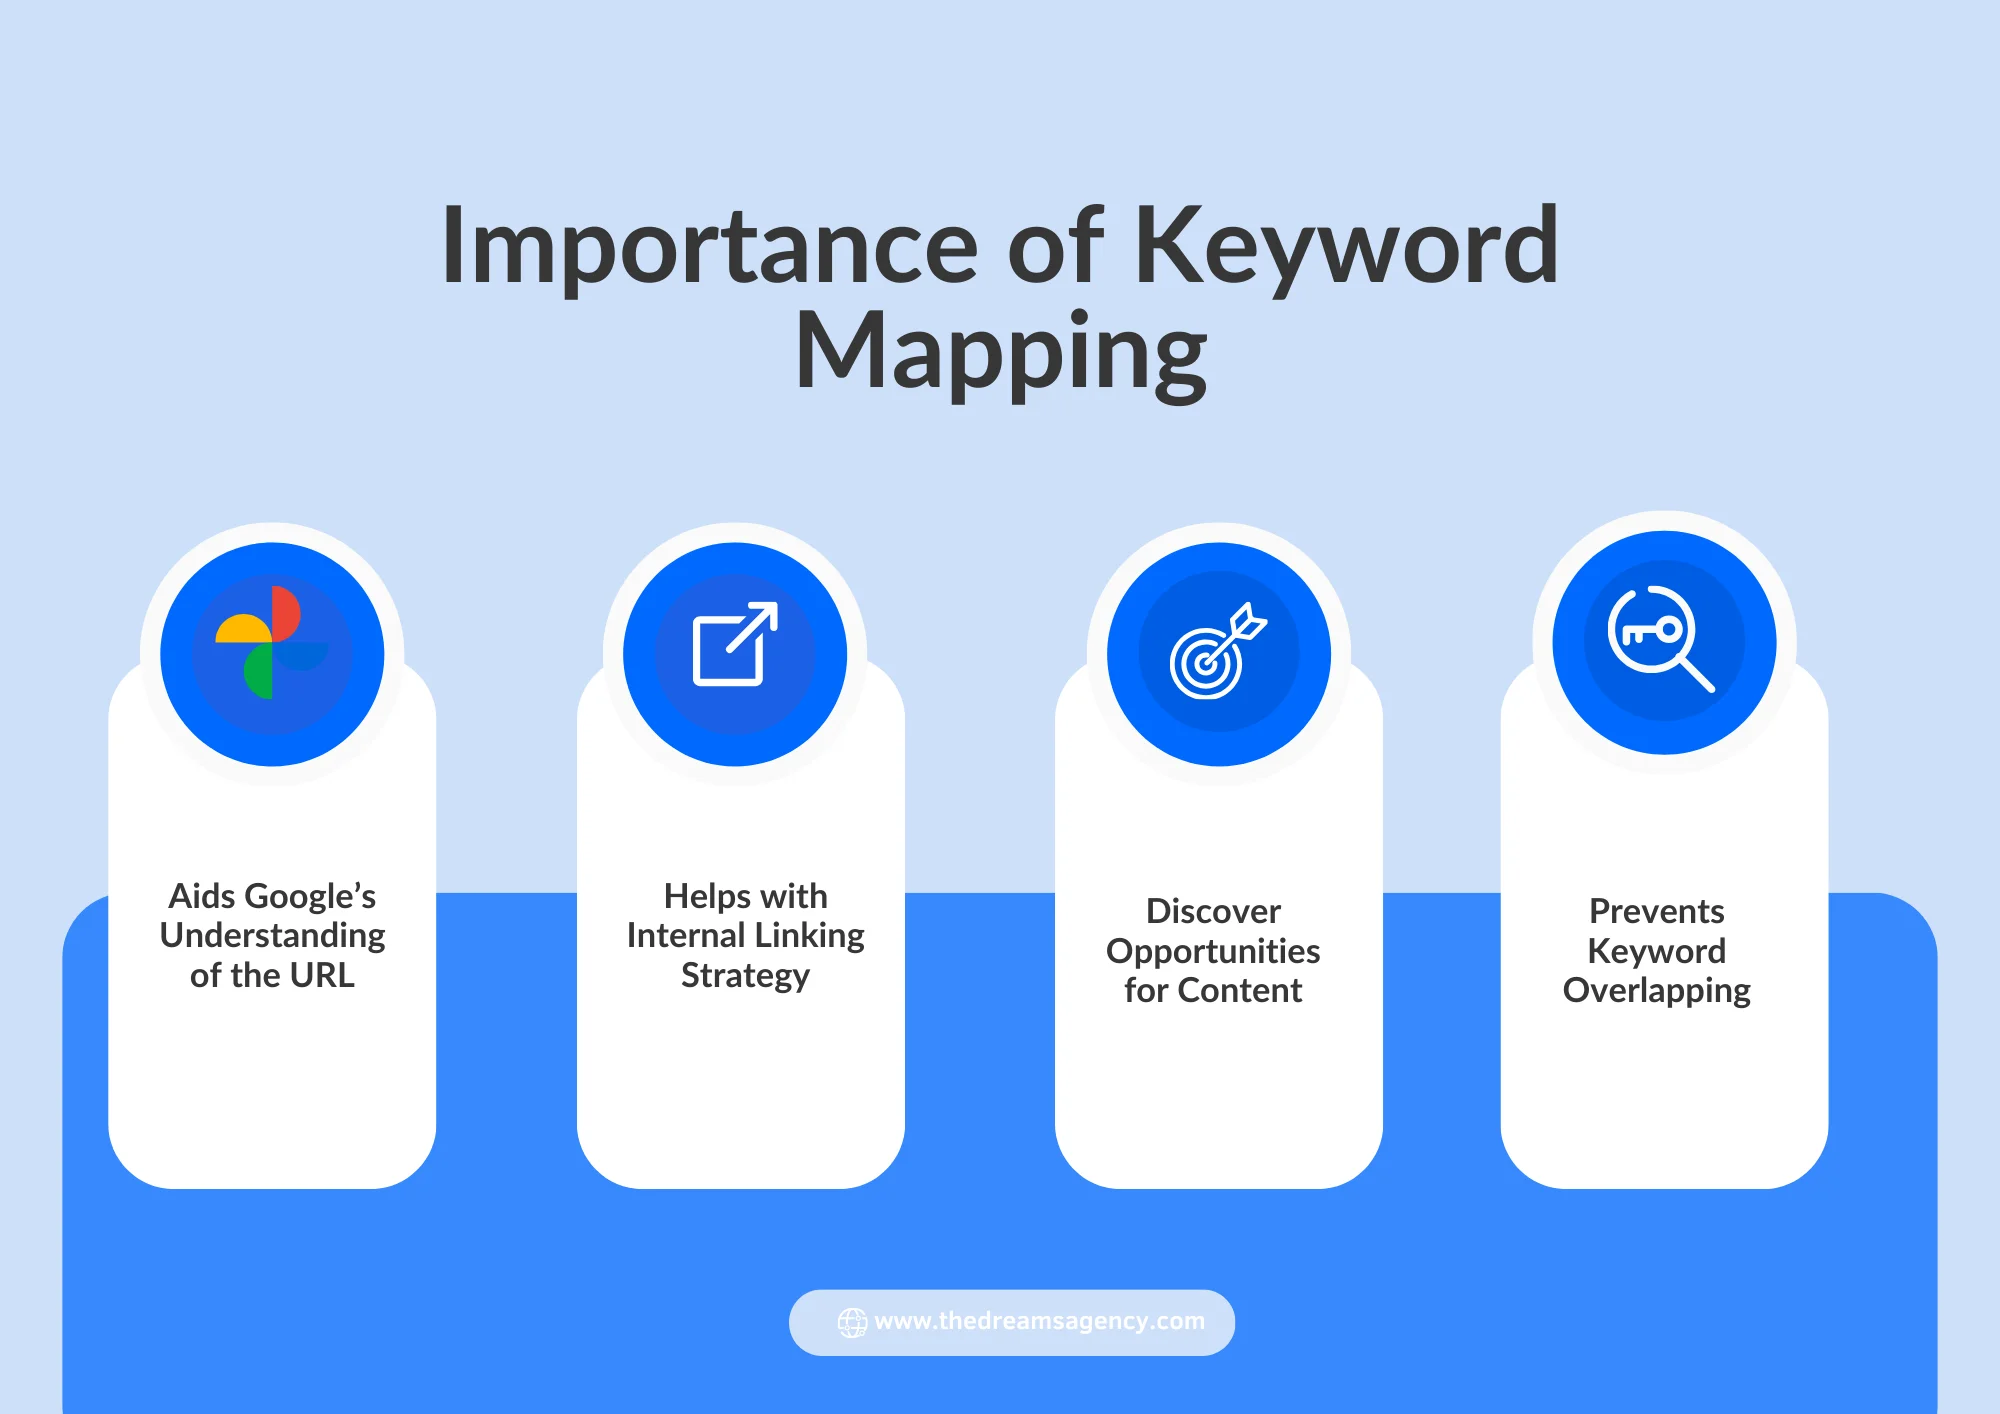 An infographic on the importance of keyword mapping